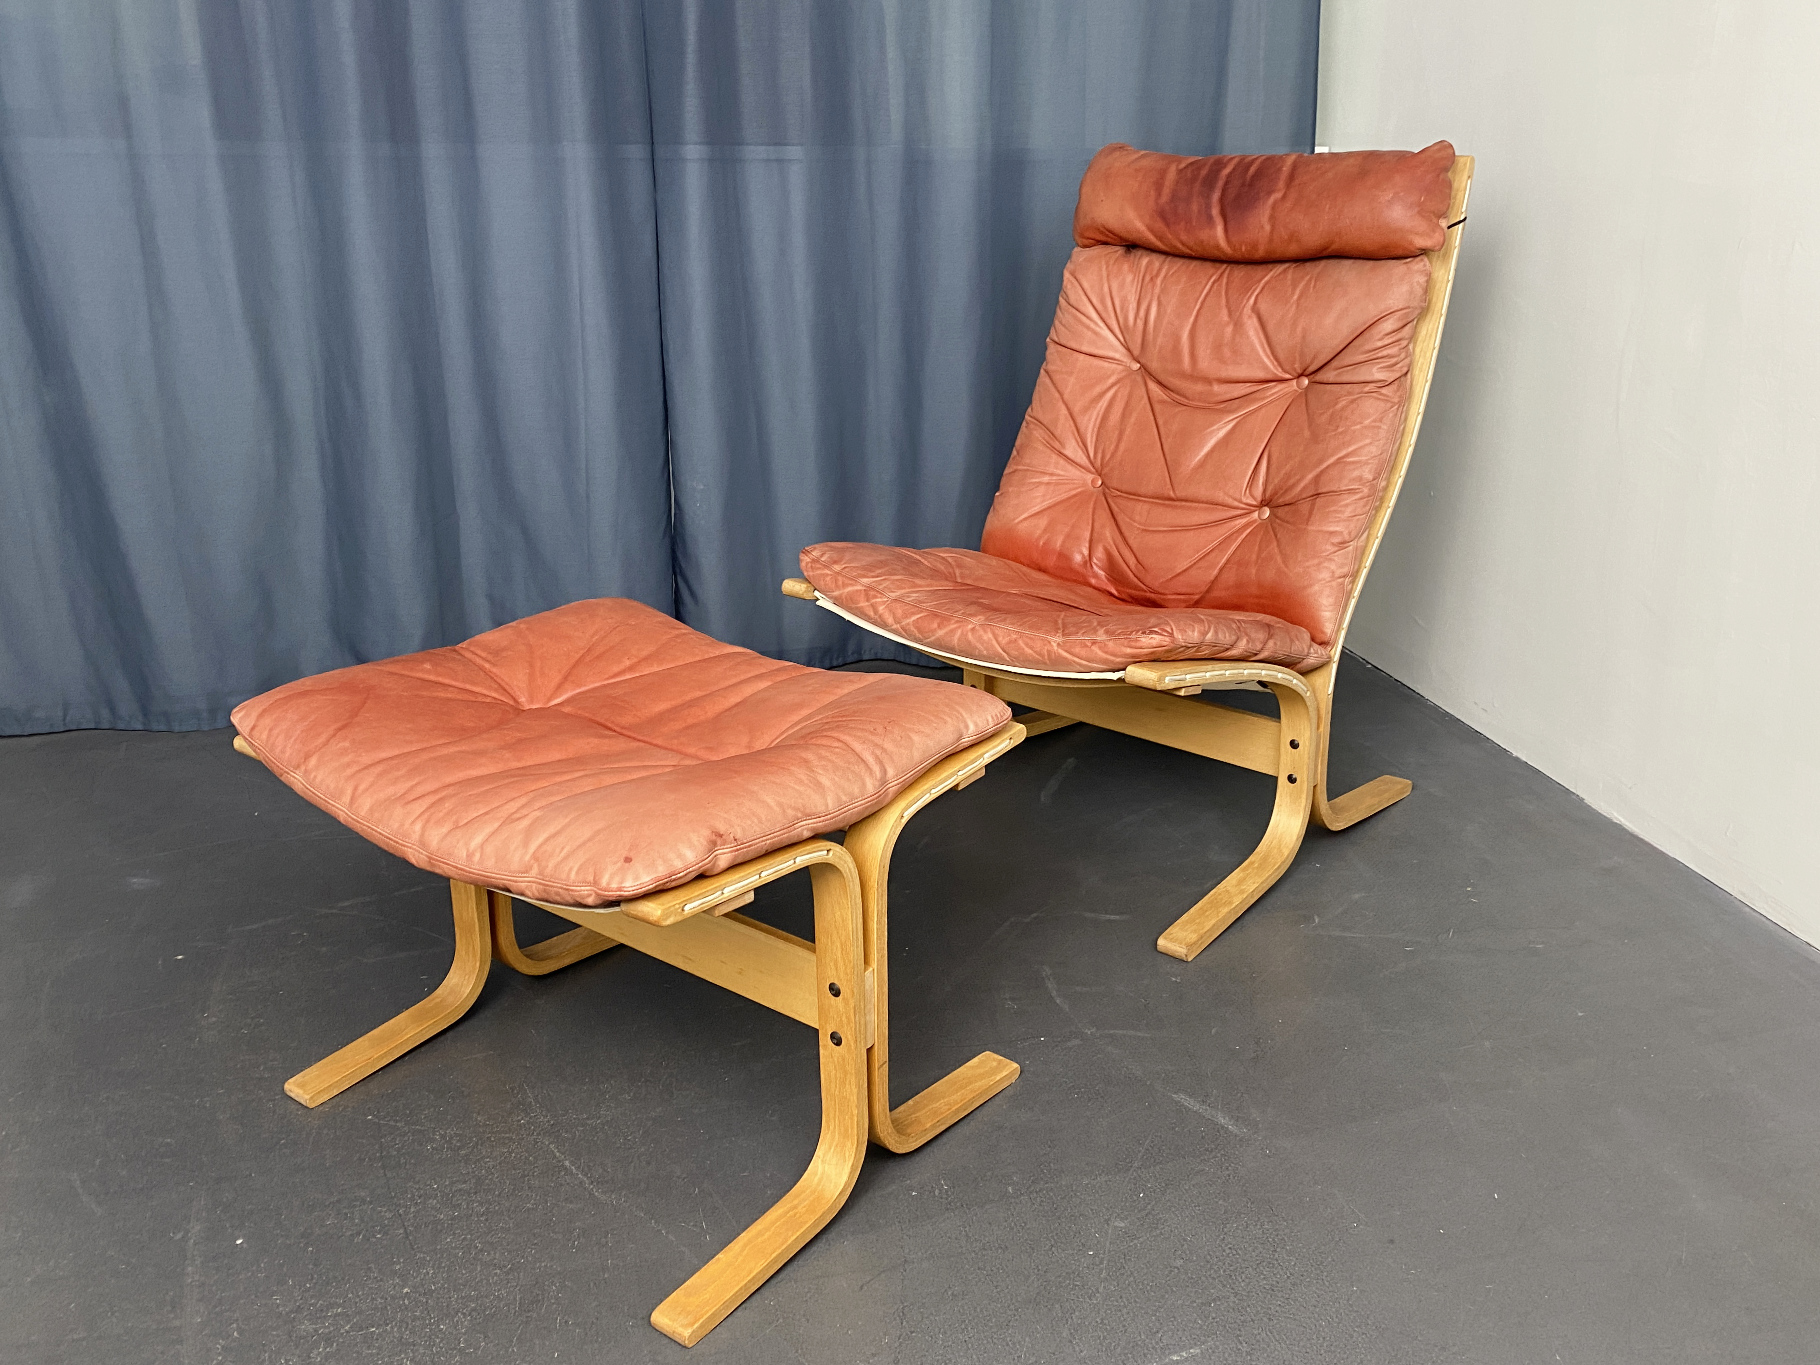 Siesta Lounge Chair with Ottoman, Burgundy Leather, by Ingmar Relling, for Westnova, Norway, 1960s